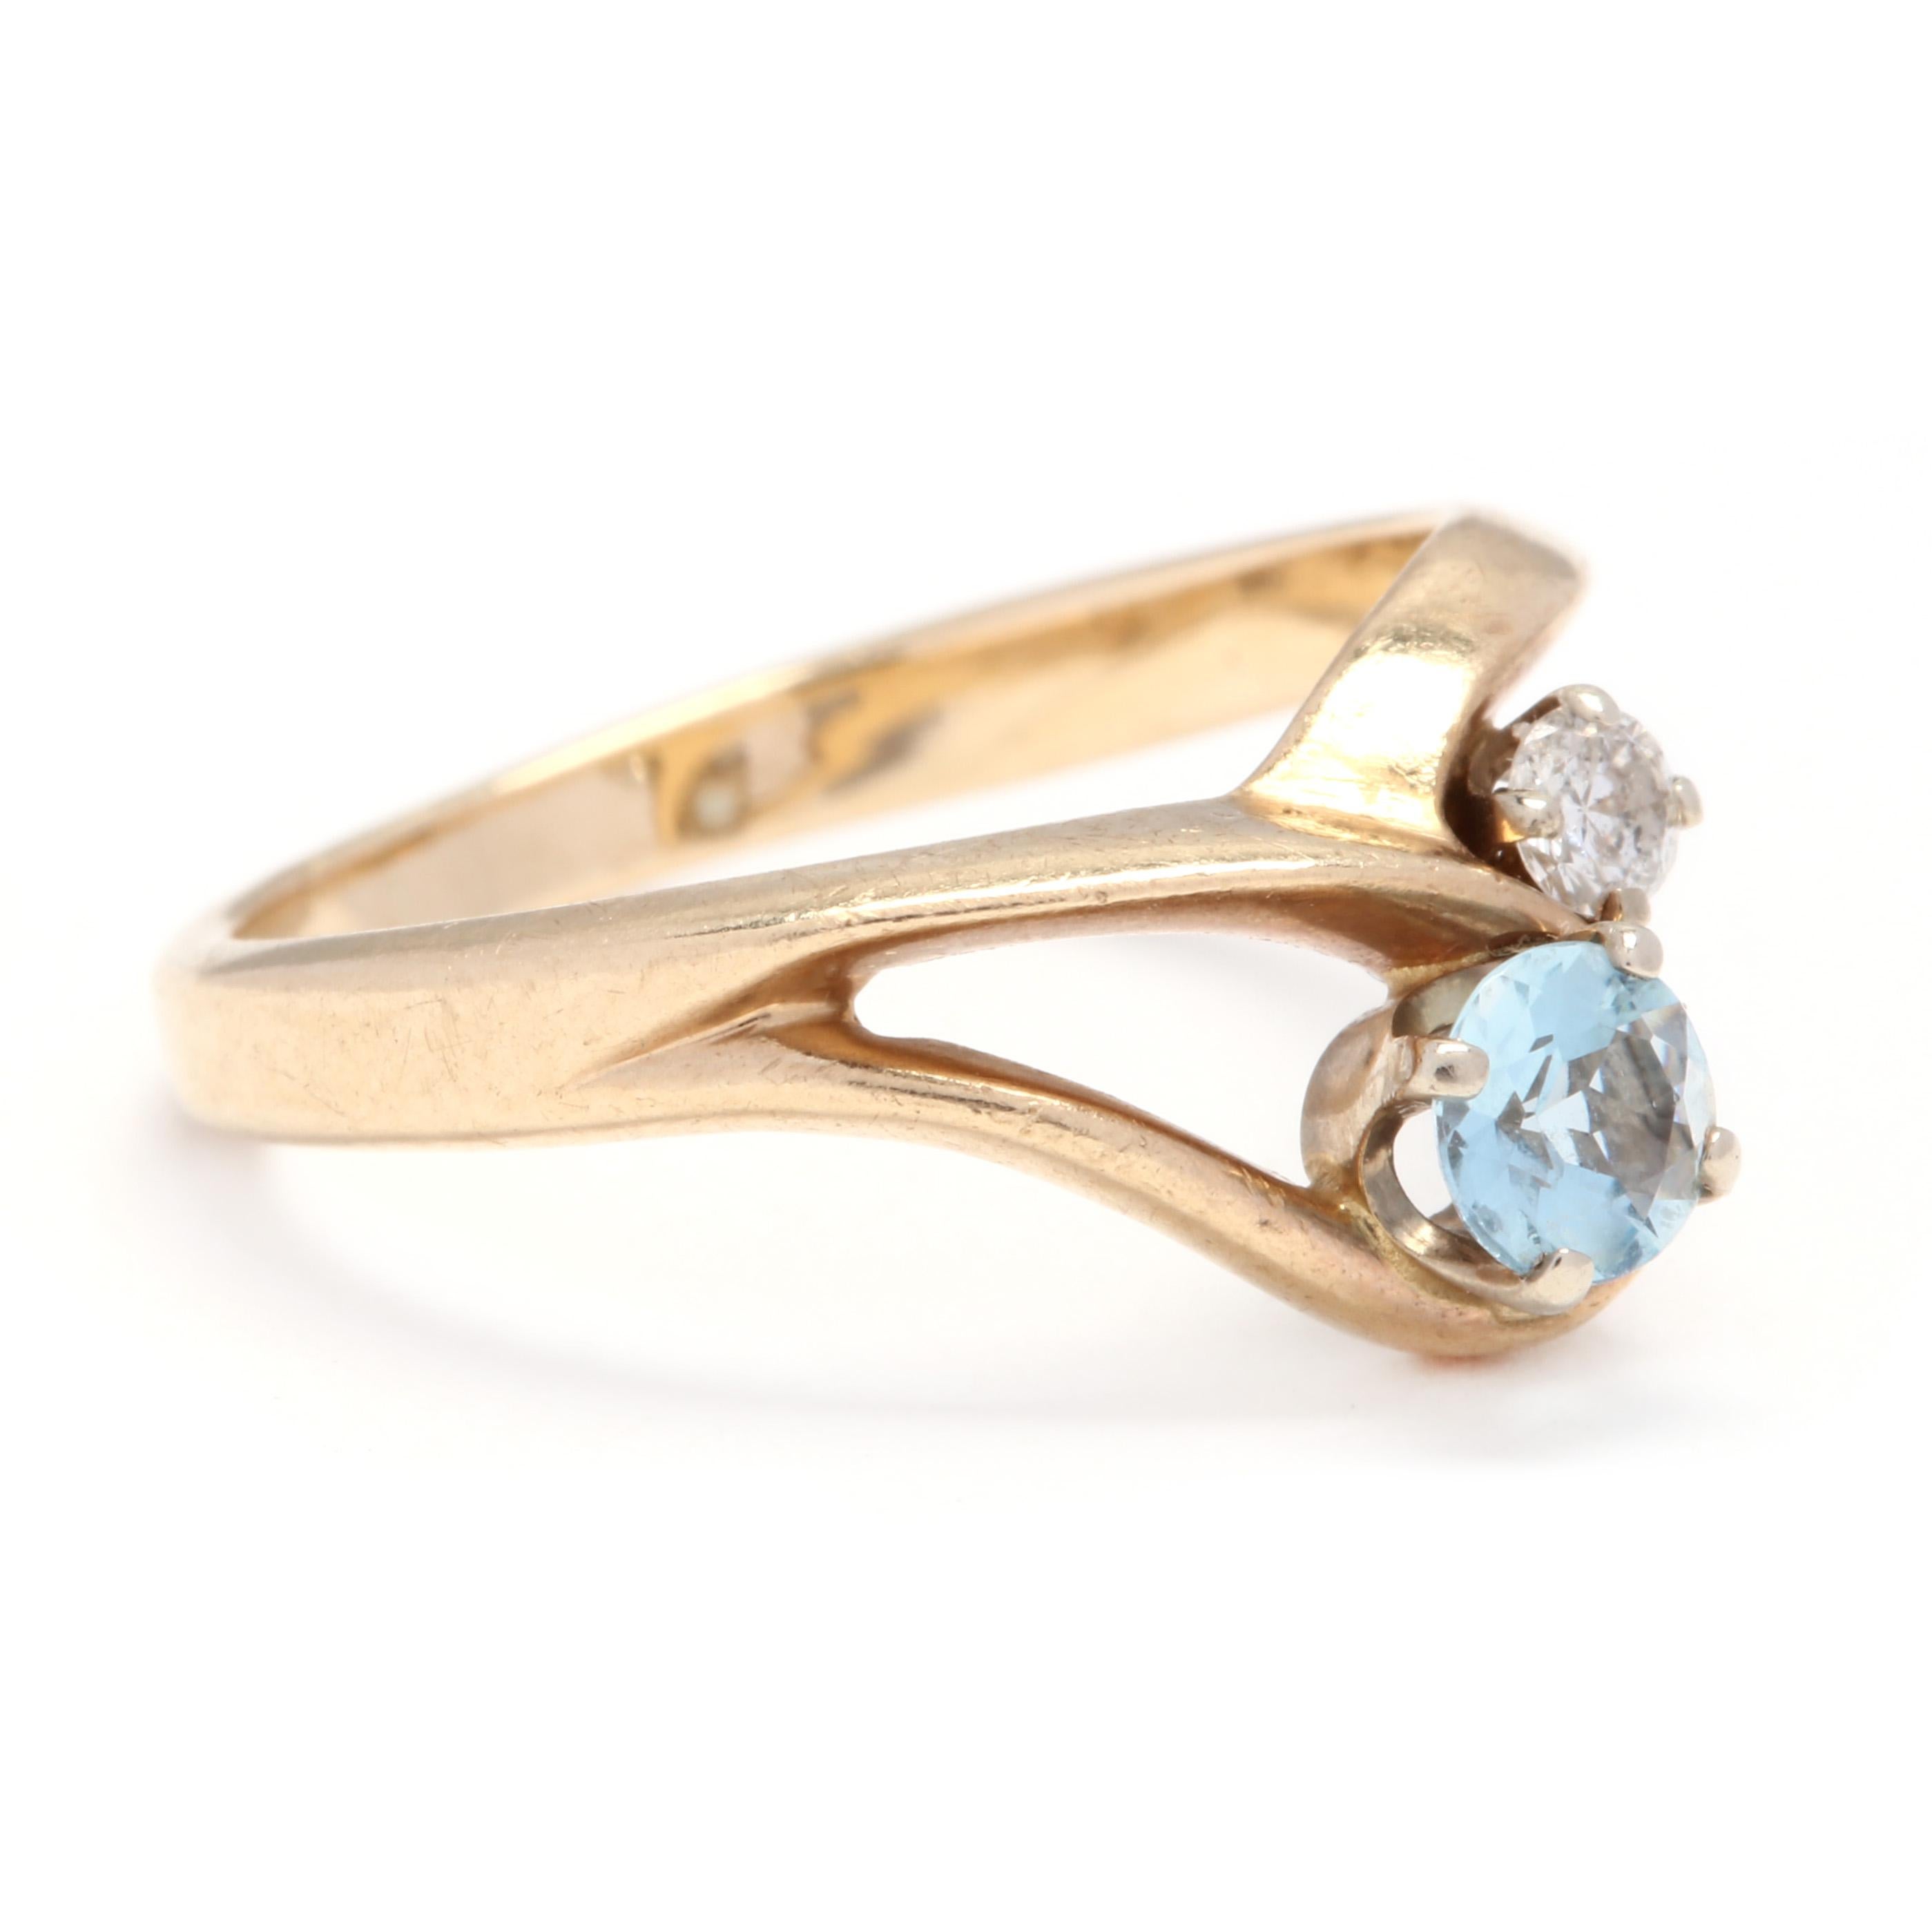 14k yellow gold aquamarine and diamond minimalist ring. A simple, free form ring with a round aquamarine that's approximately 0.24 carats with a 0.06 carat round diamond set next to it. This is a great piece for someone young or those who appreciate